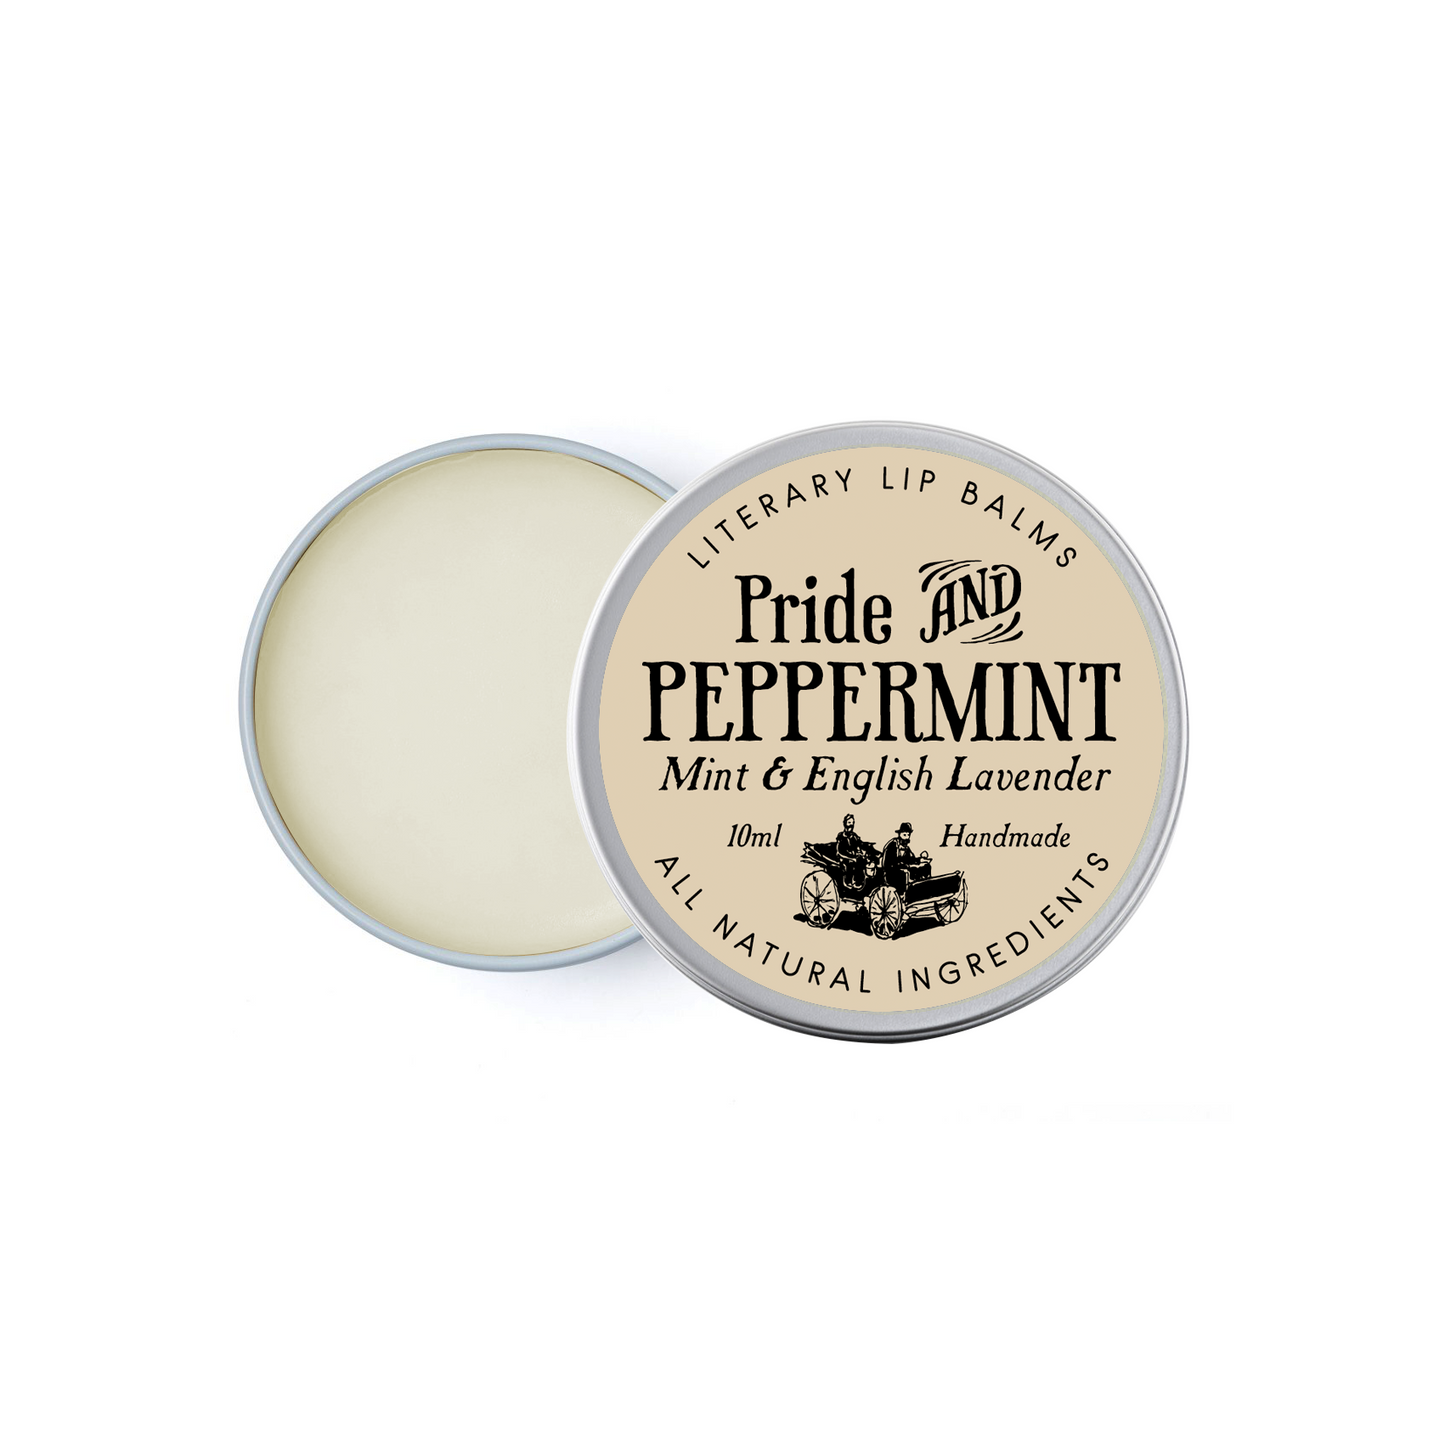 Literary Lip Balms: Pride and Peppermint